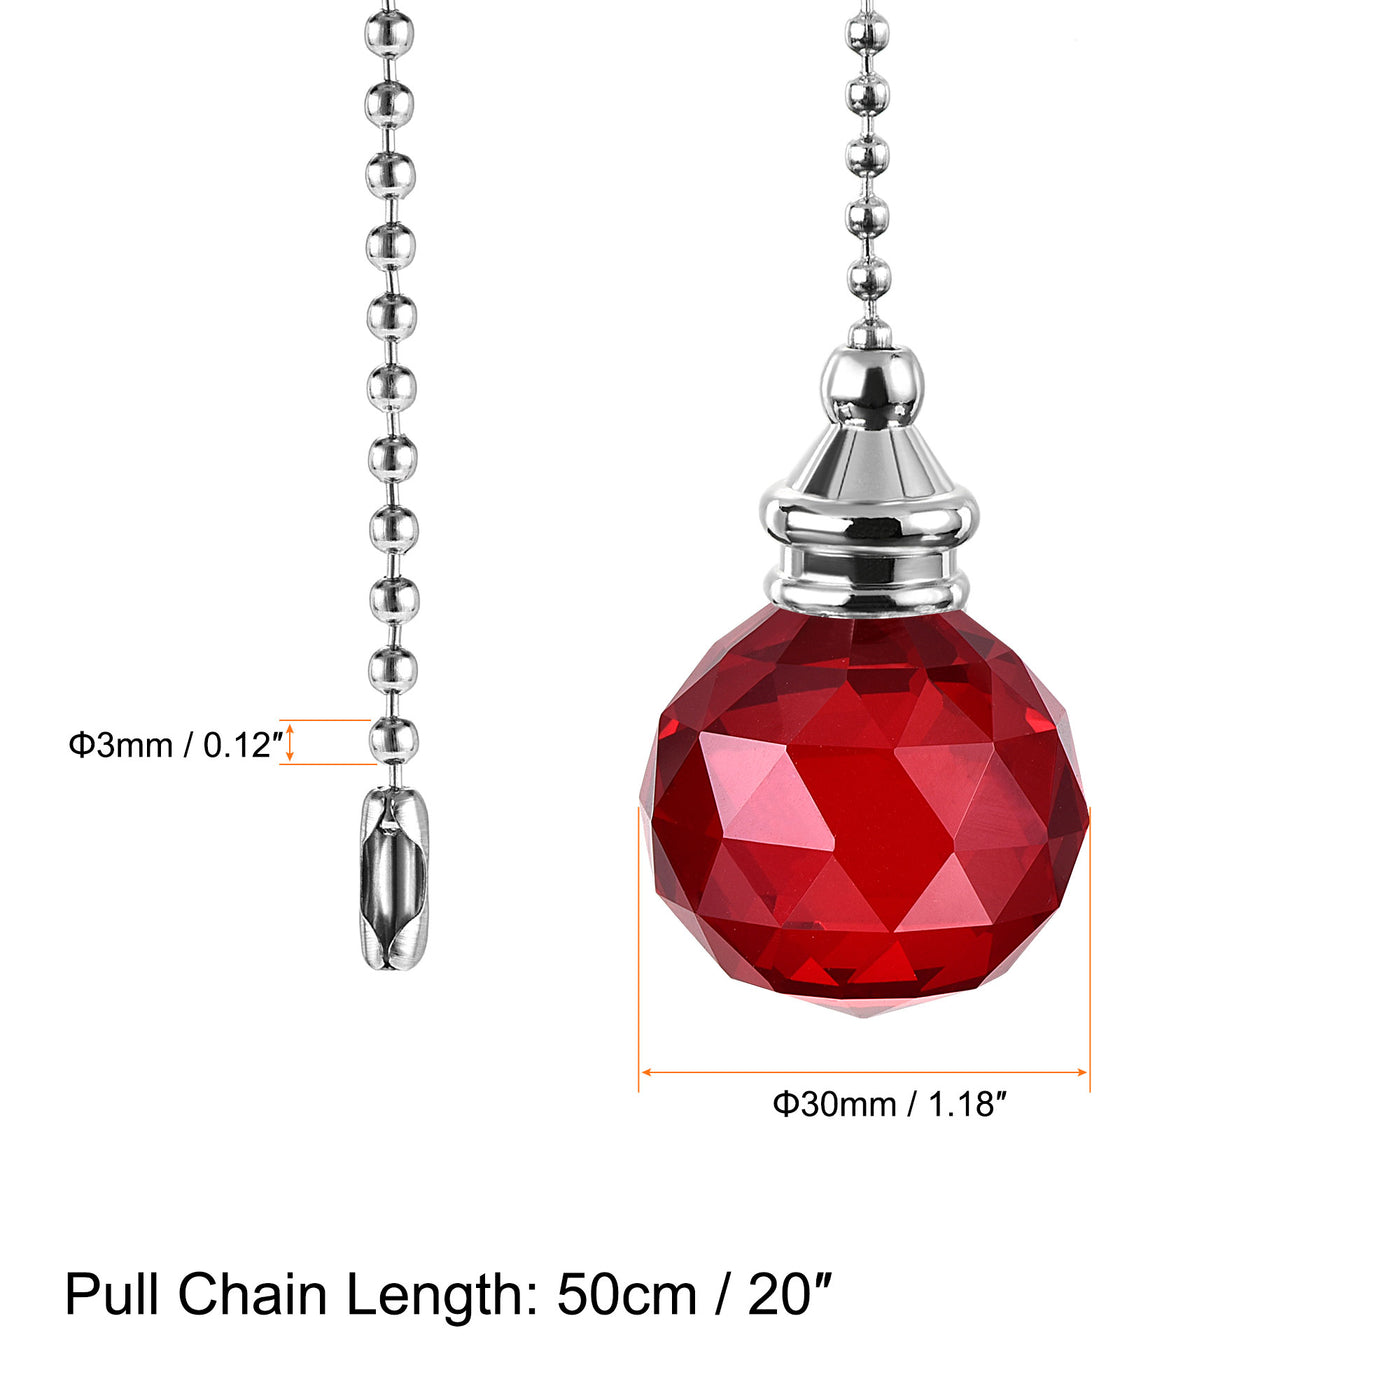 uxcell Uxcell Ceiling Fan Pull Chain, 20 Inch Nickel Finish Chain Ornament Extension, 30mm Red Crystal Ball Pendant